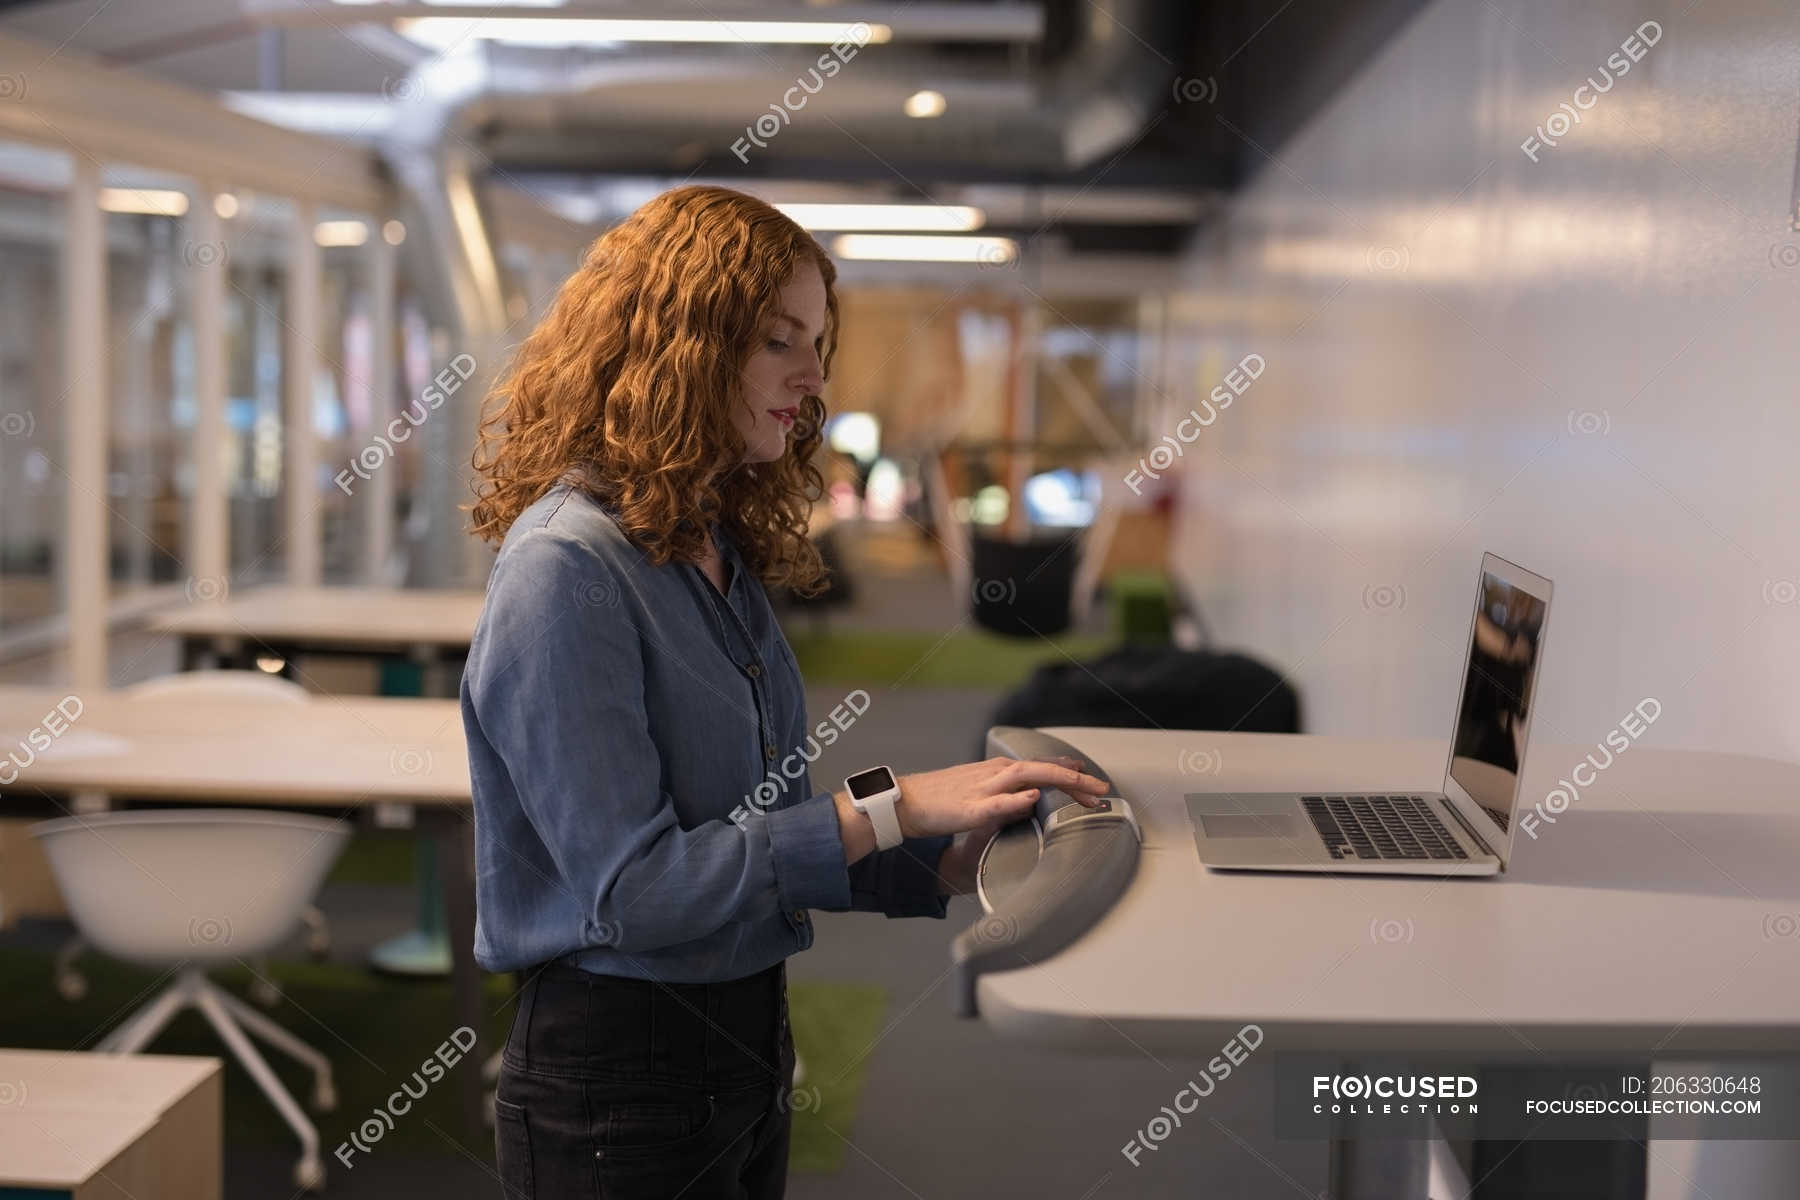 Female Executive Exercising On Treadmill In Office One Person